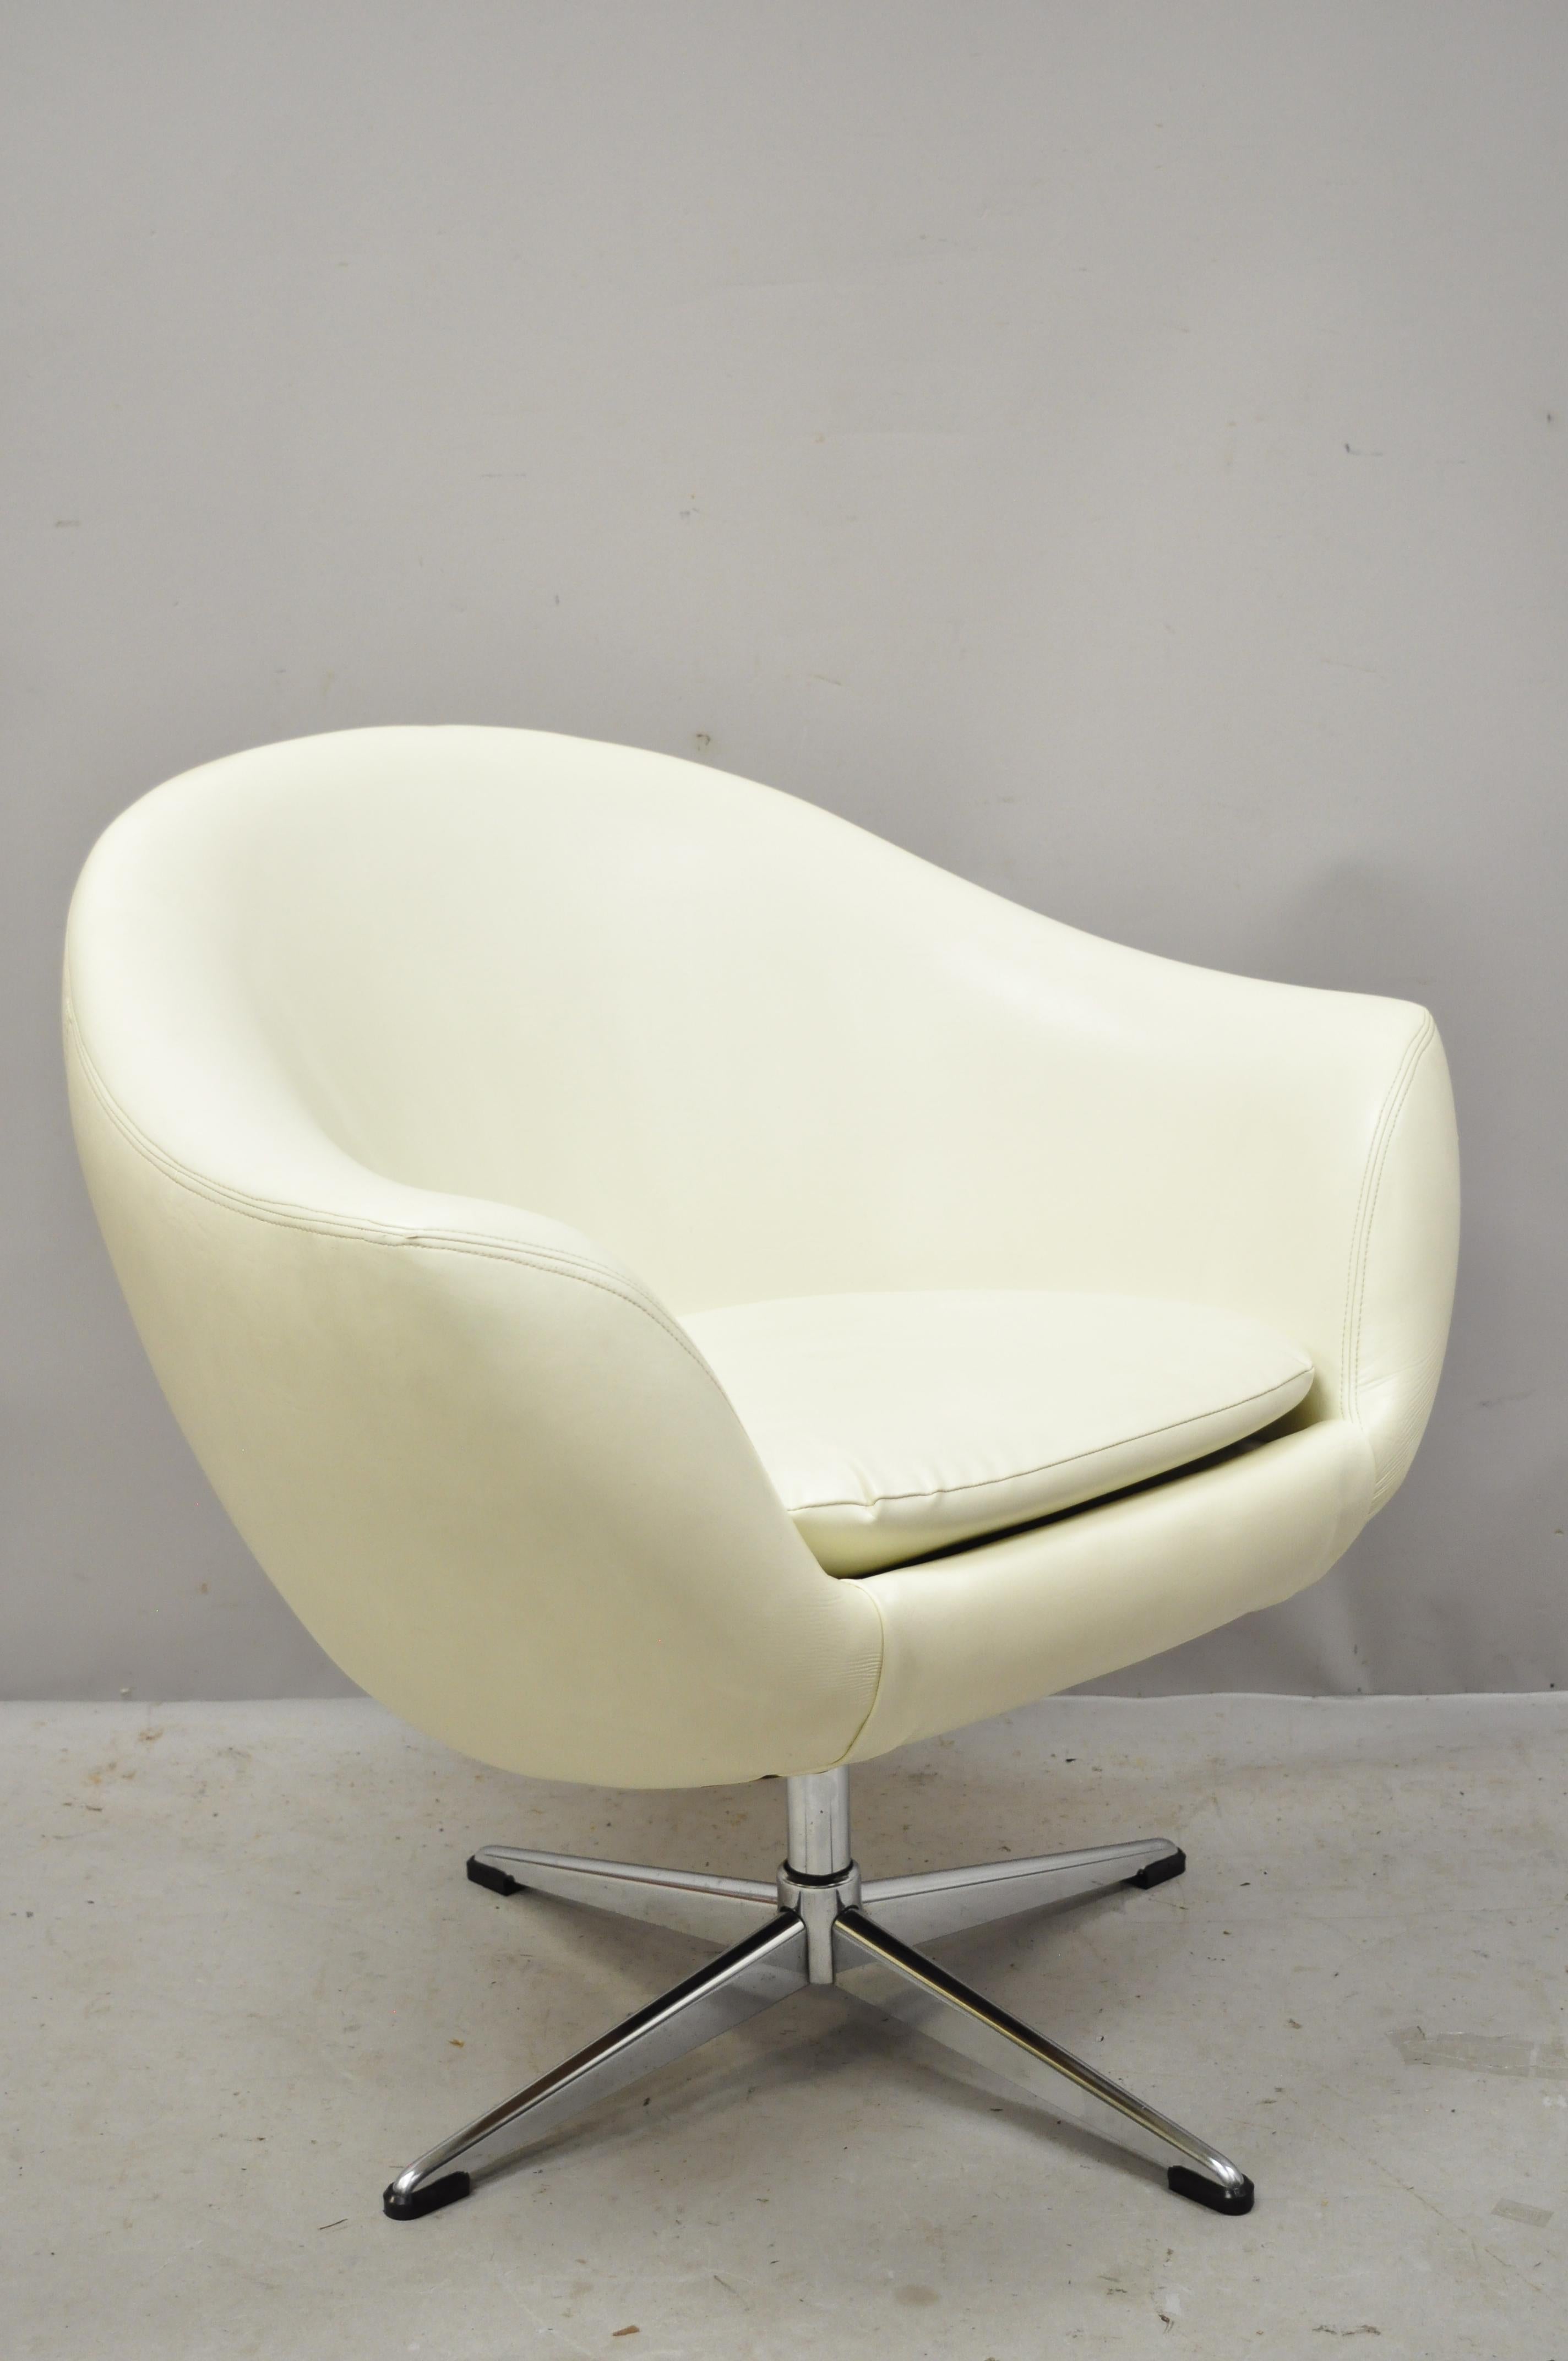 Mid-Century Modern contemporary Shells Inc Overman style white vinyl swivel lounge pod chair. Item features swivel seat, metal star base, original label, very nice vintage item, clean modernist lines, circa mid-20th century. Measurements: 30